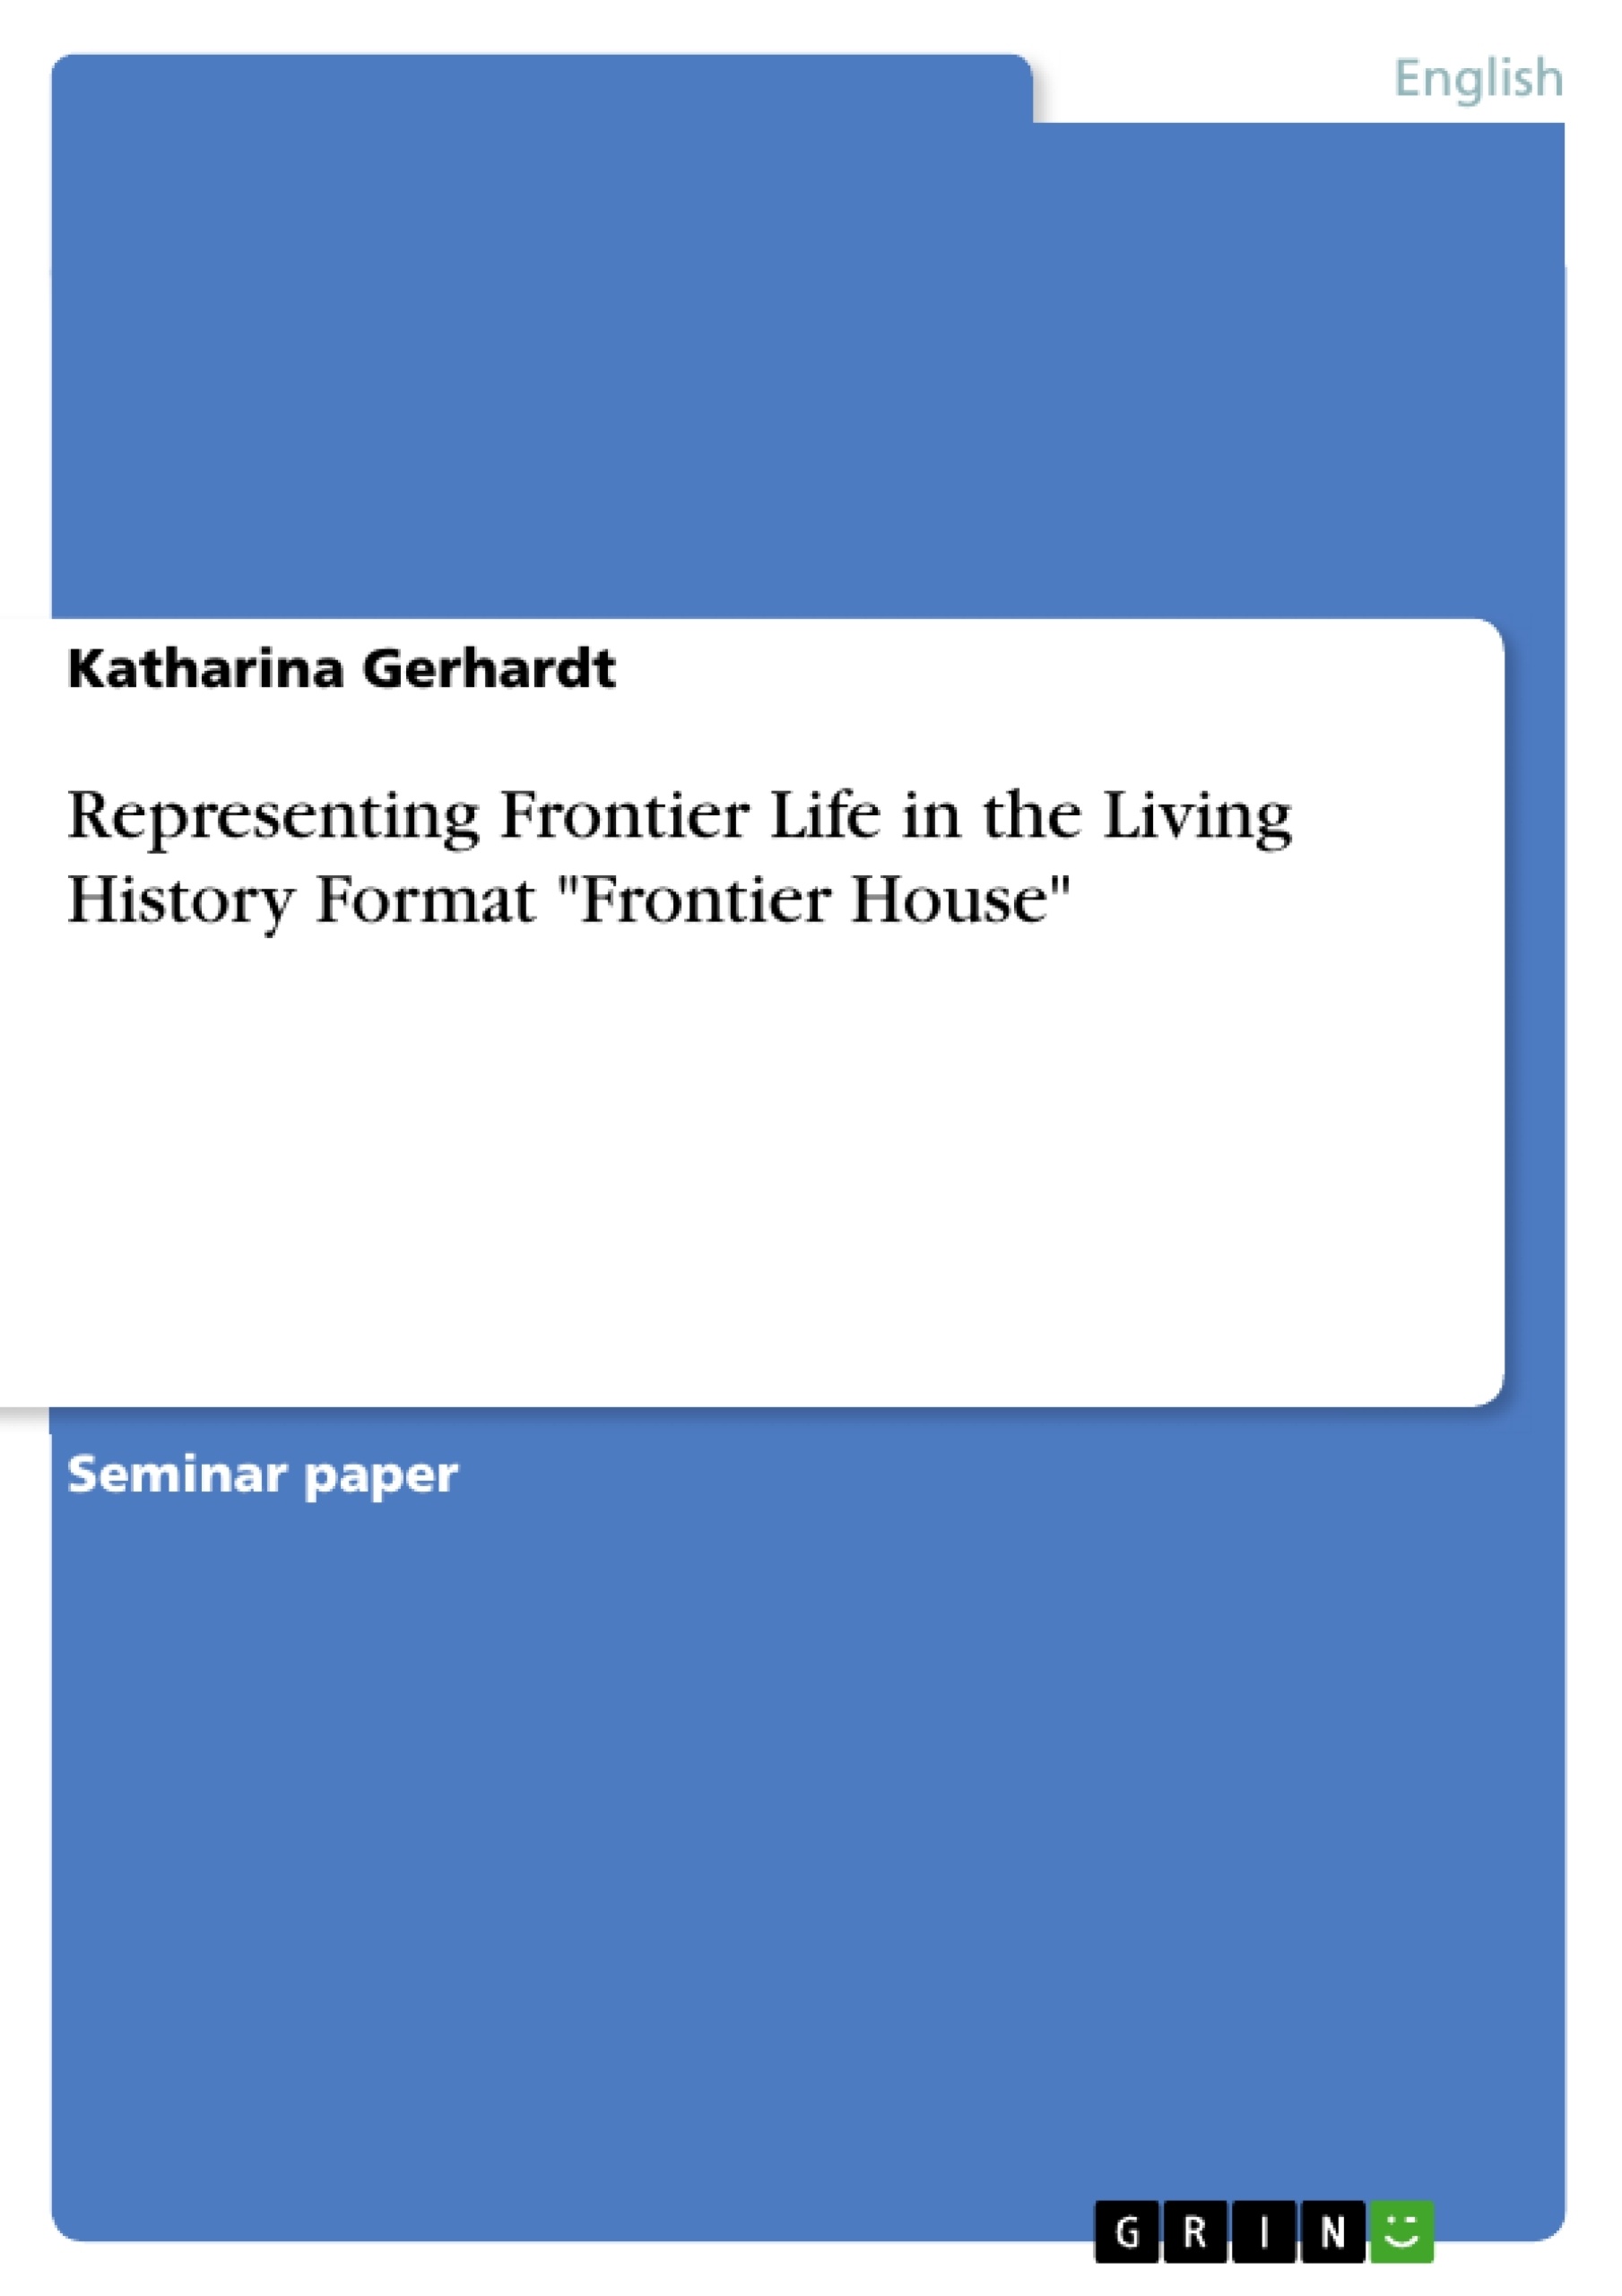 Title: Representing Frontier Life in the Living History Format "Frontier House"